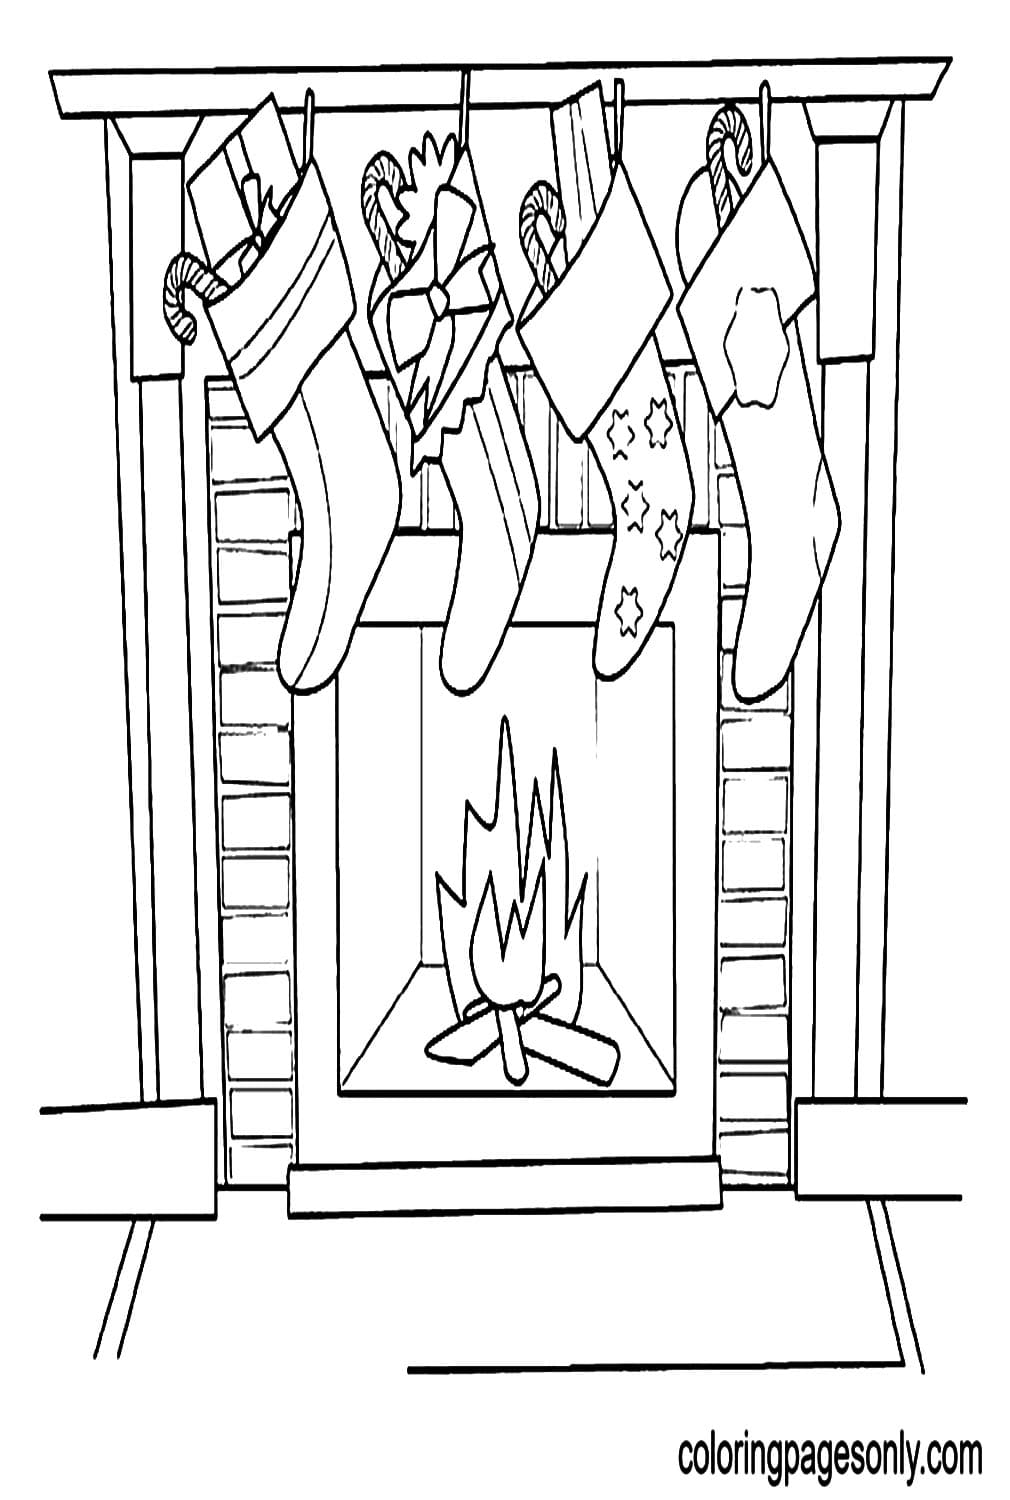 Fireplace and Stockings Coloring Page - Free Printable Coloring Pages